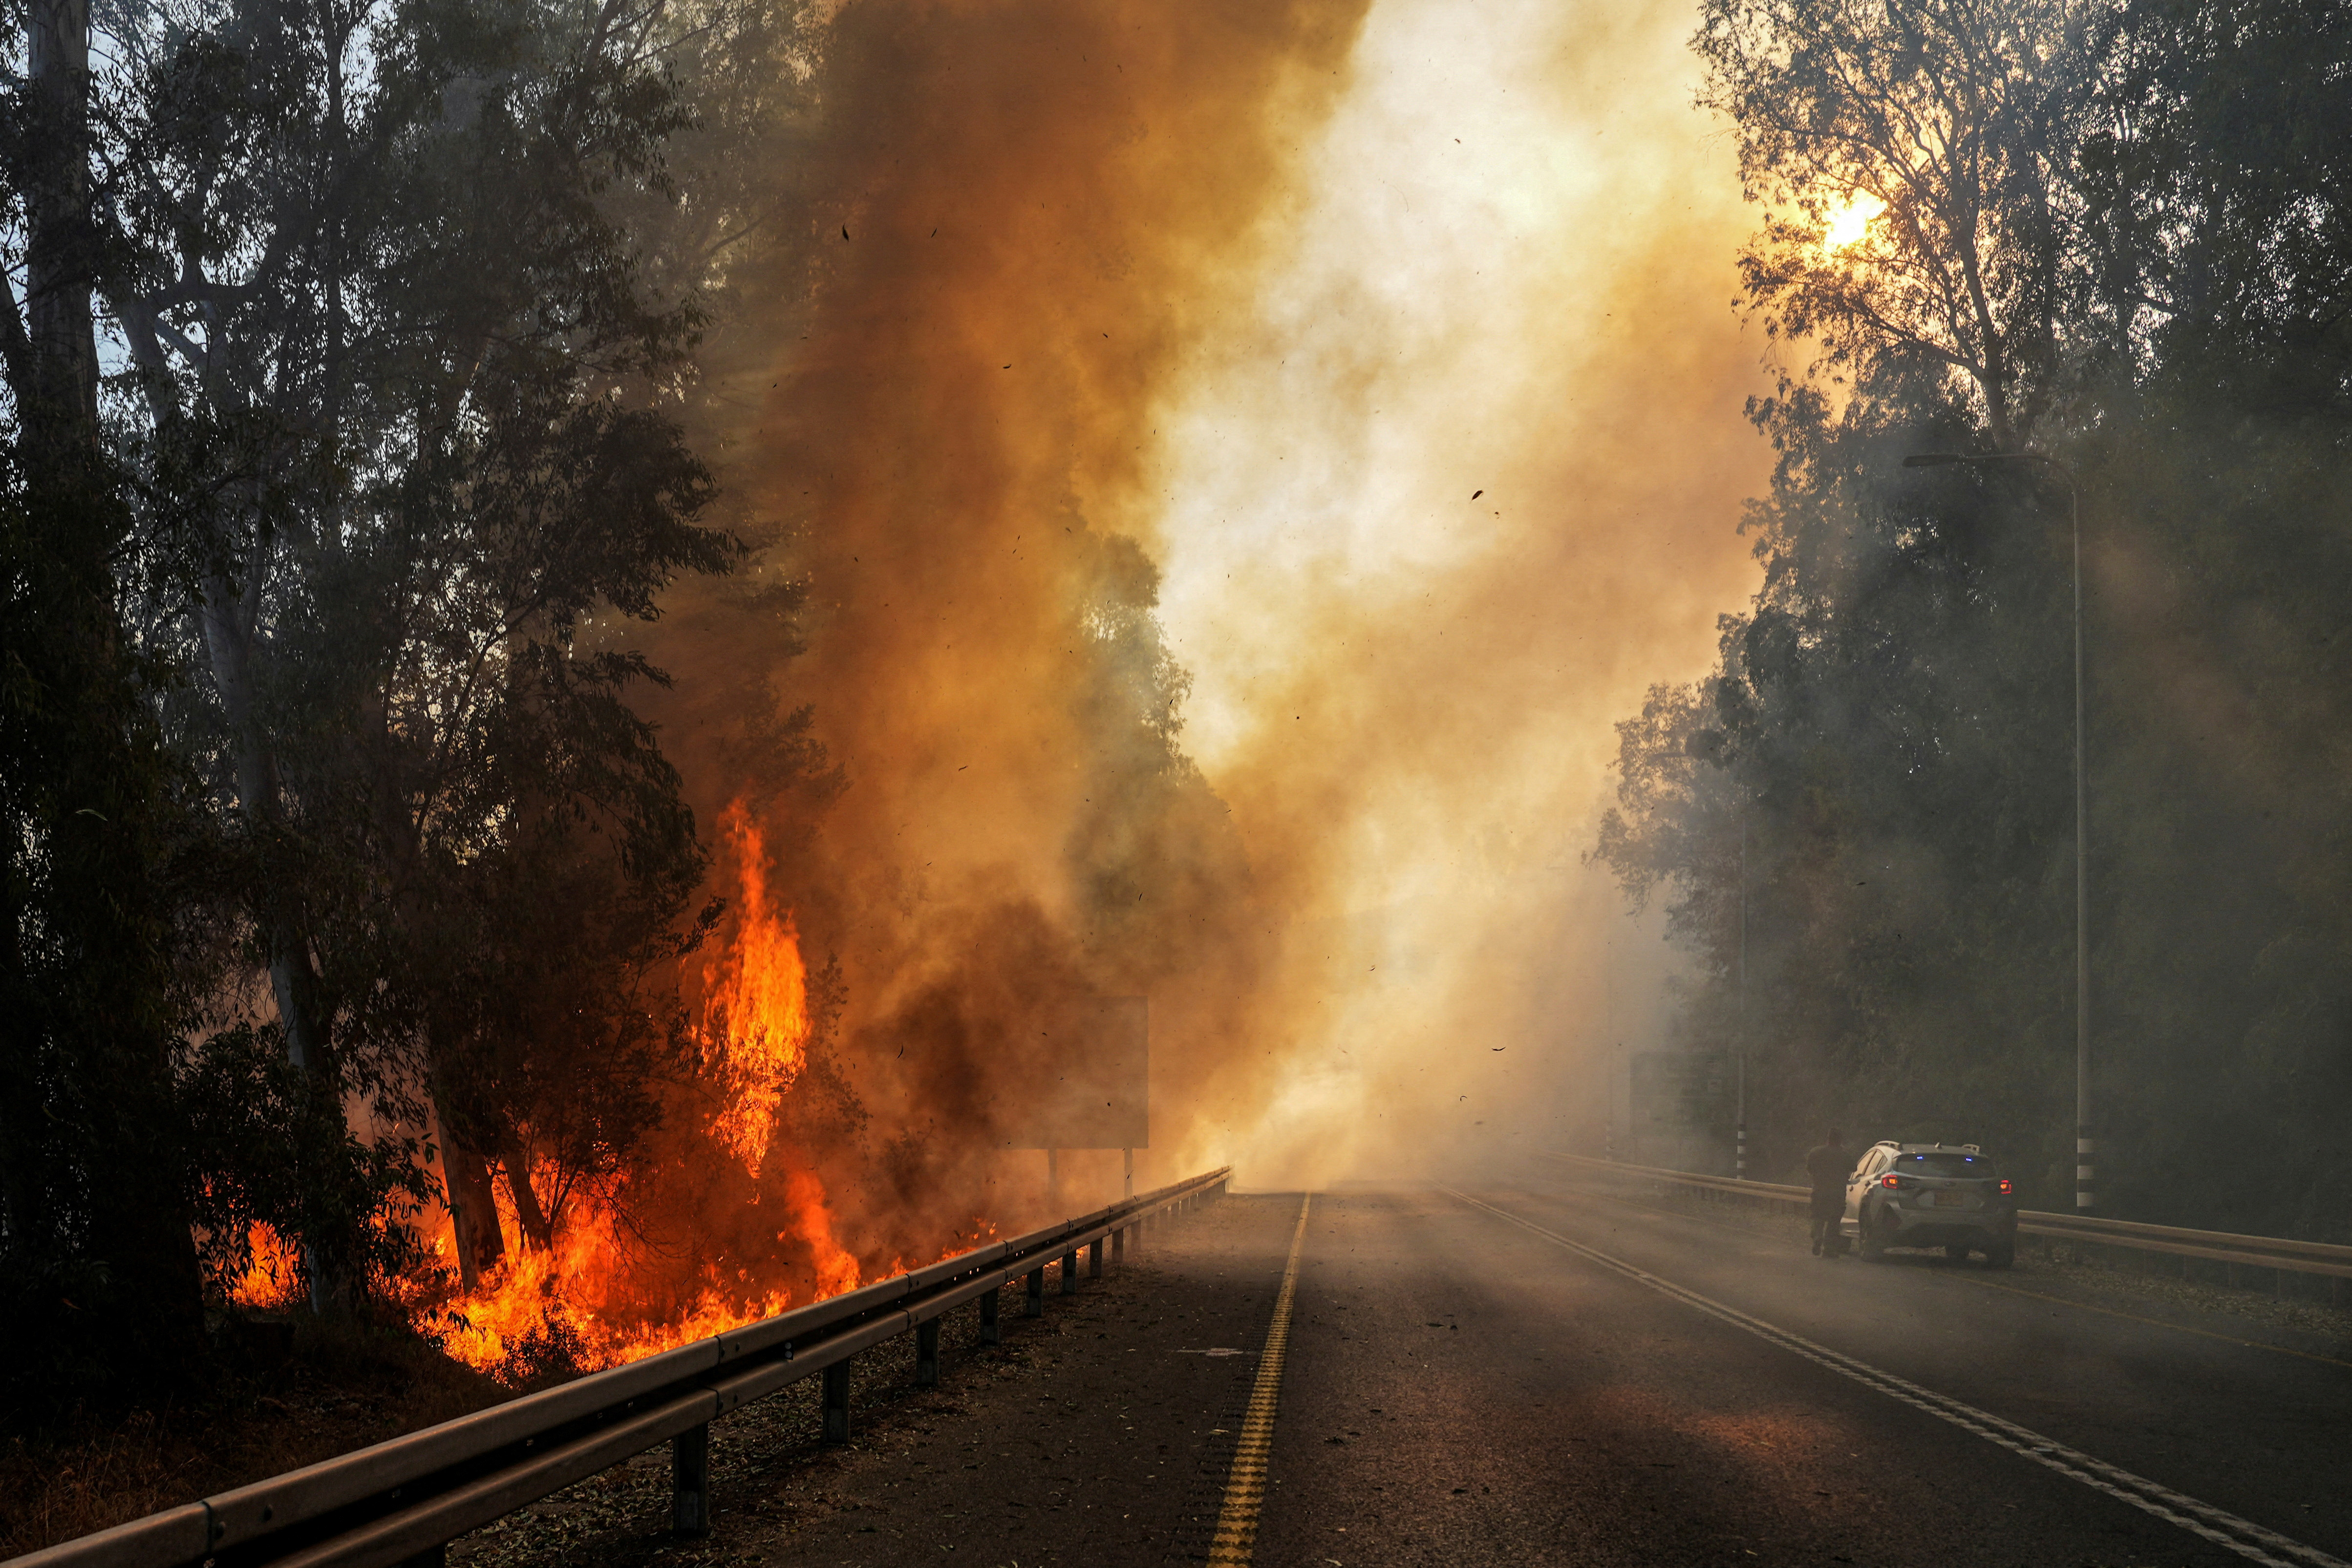 Flames seen at the side of a road, amid ongoing cross-border hostilities between Hezbollah and Israeli forces, close to the Israel border with Lebanon